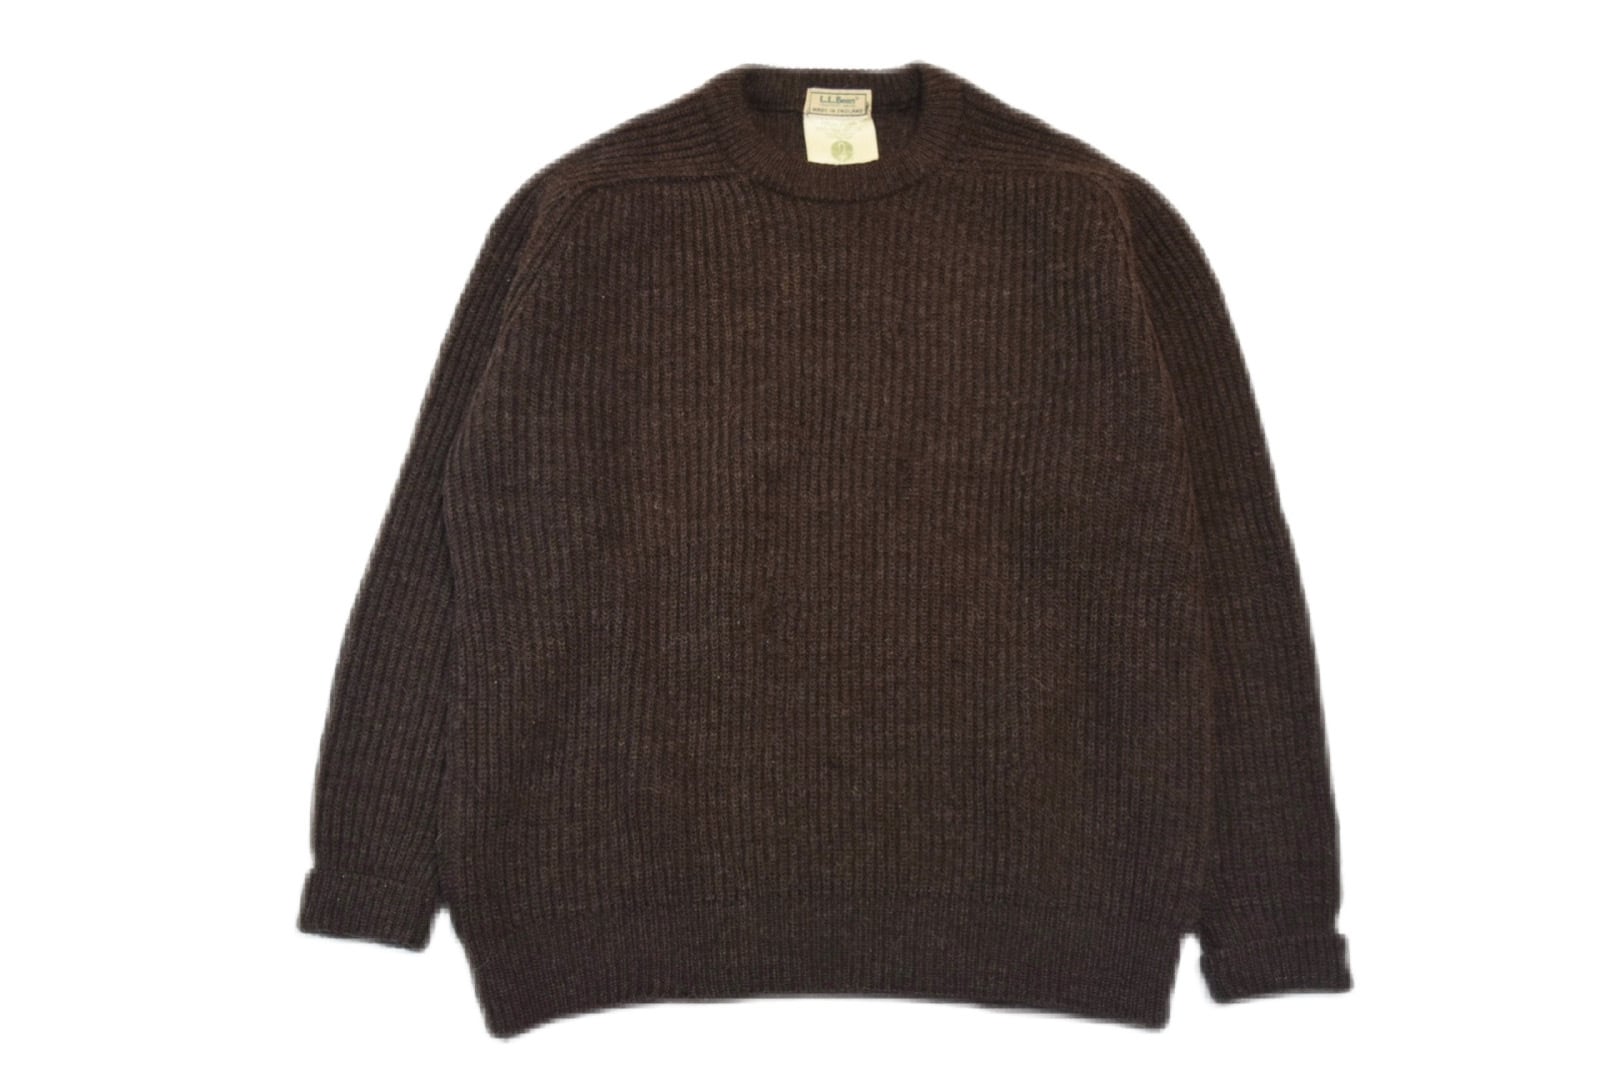 USED 80s L.L.Bean Wool sweater -Large 01889